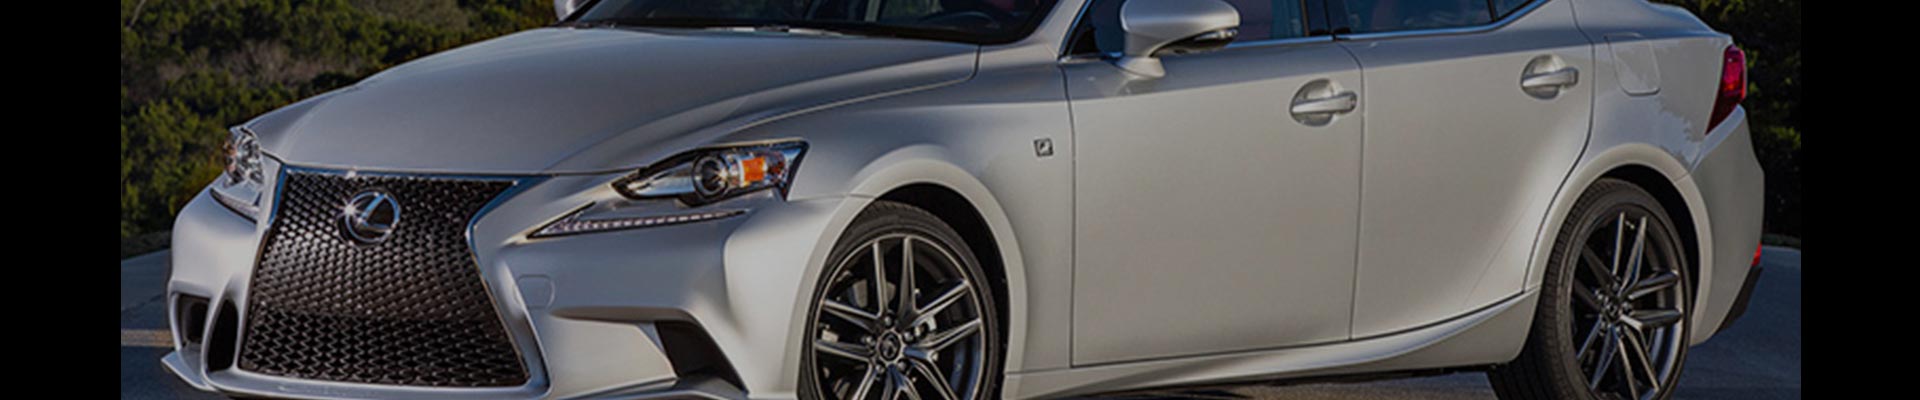 Shop Replacement and OEM 2010 Lexus IS350 Parts with Discounted Price on the Net